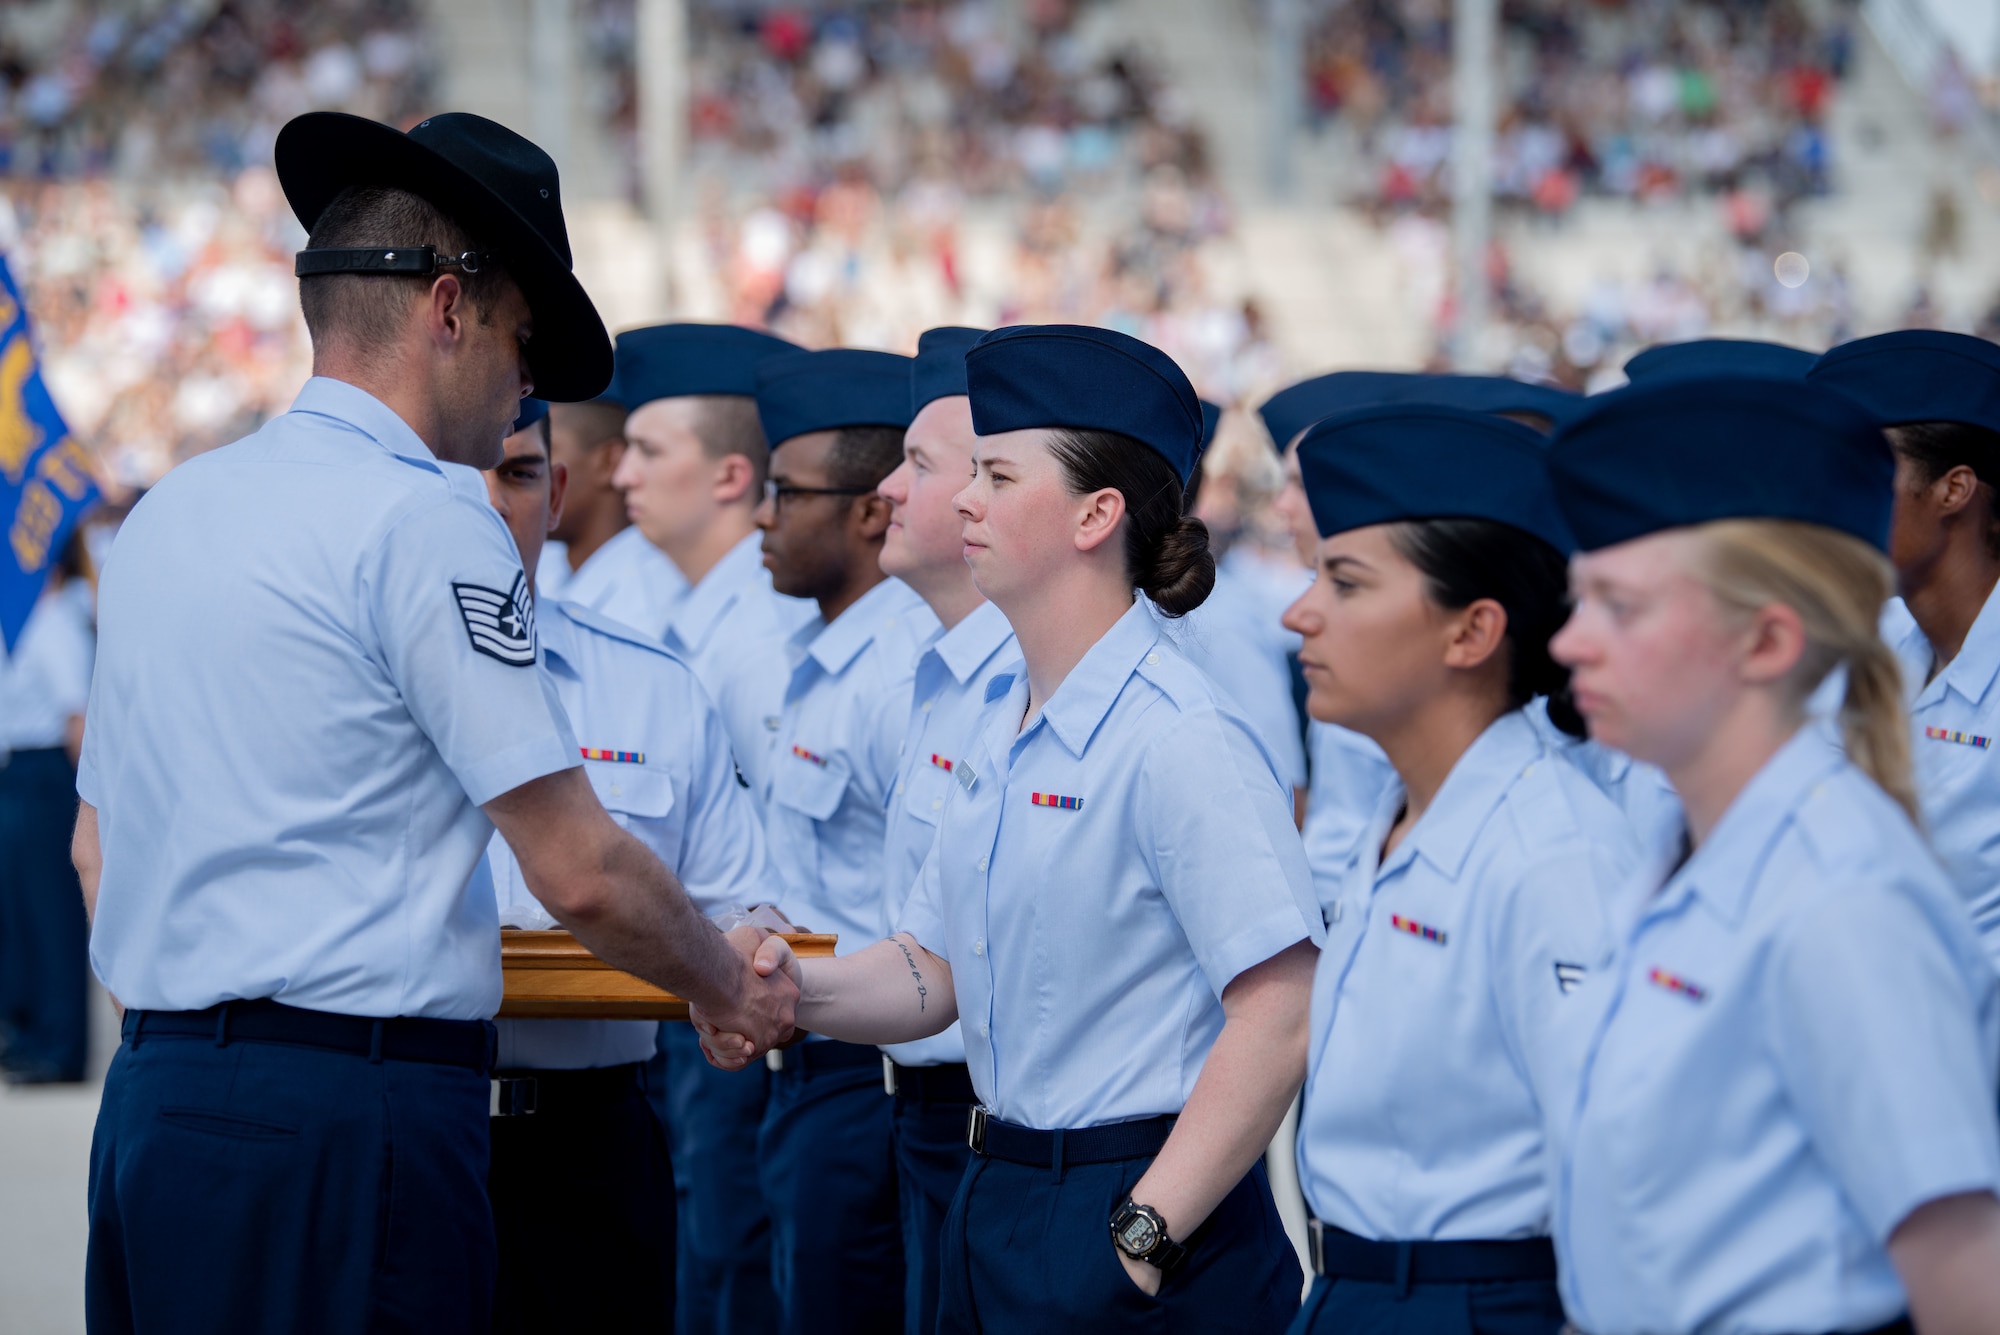 More than 600 Airmen assigned to the 433rd Training Squadron graduated from Basic Military Training at Joint Base San Antonio-Lackland, Texas, June 8-9 2022.